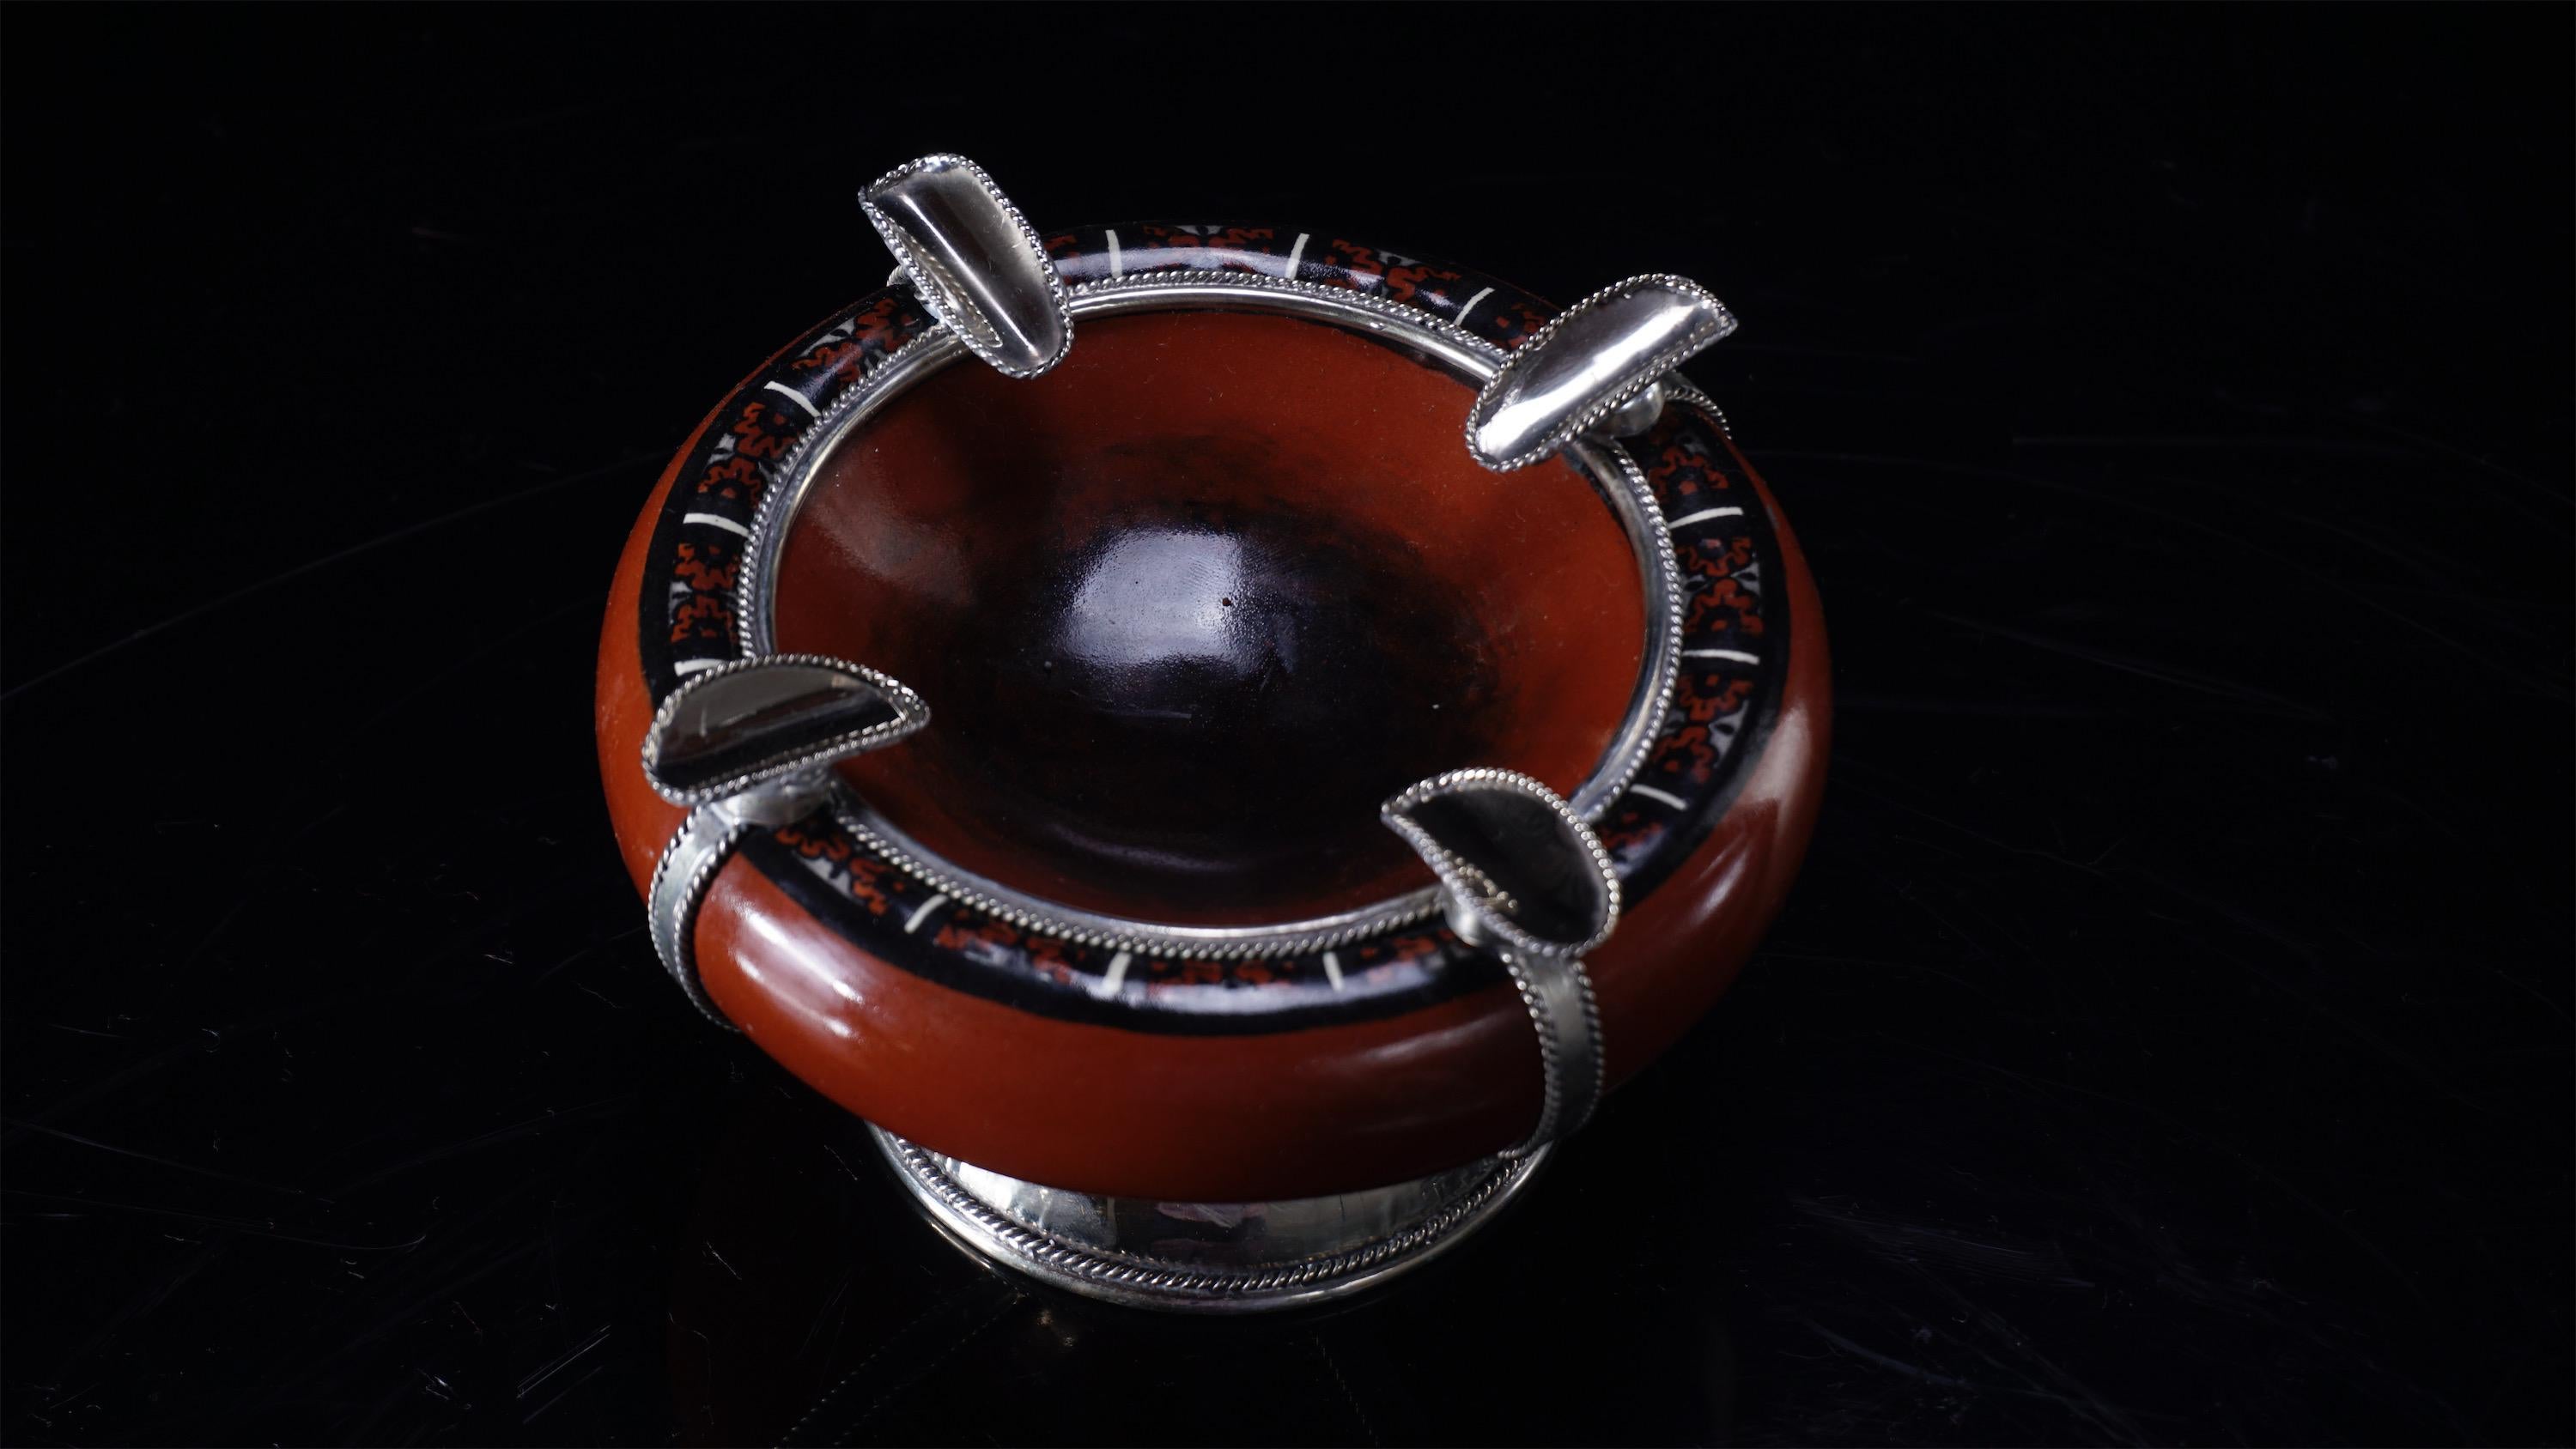 Always unique pieces is what you are going to hear about Jesus Guerrero Santo's work, all the pieces are handmade and created one by one it takes months to produce each peace.
This ceramic and white metal (alpaca) ashtray, was created in Tonalá,